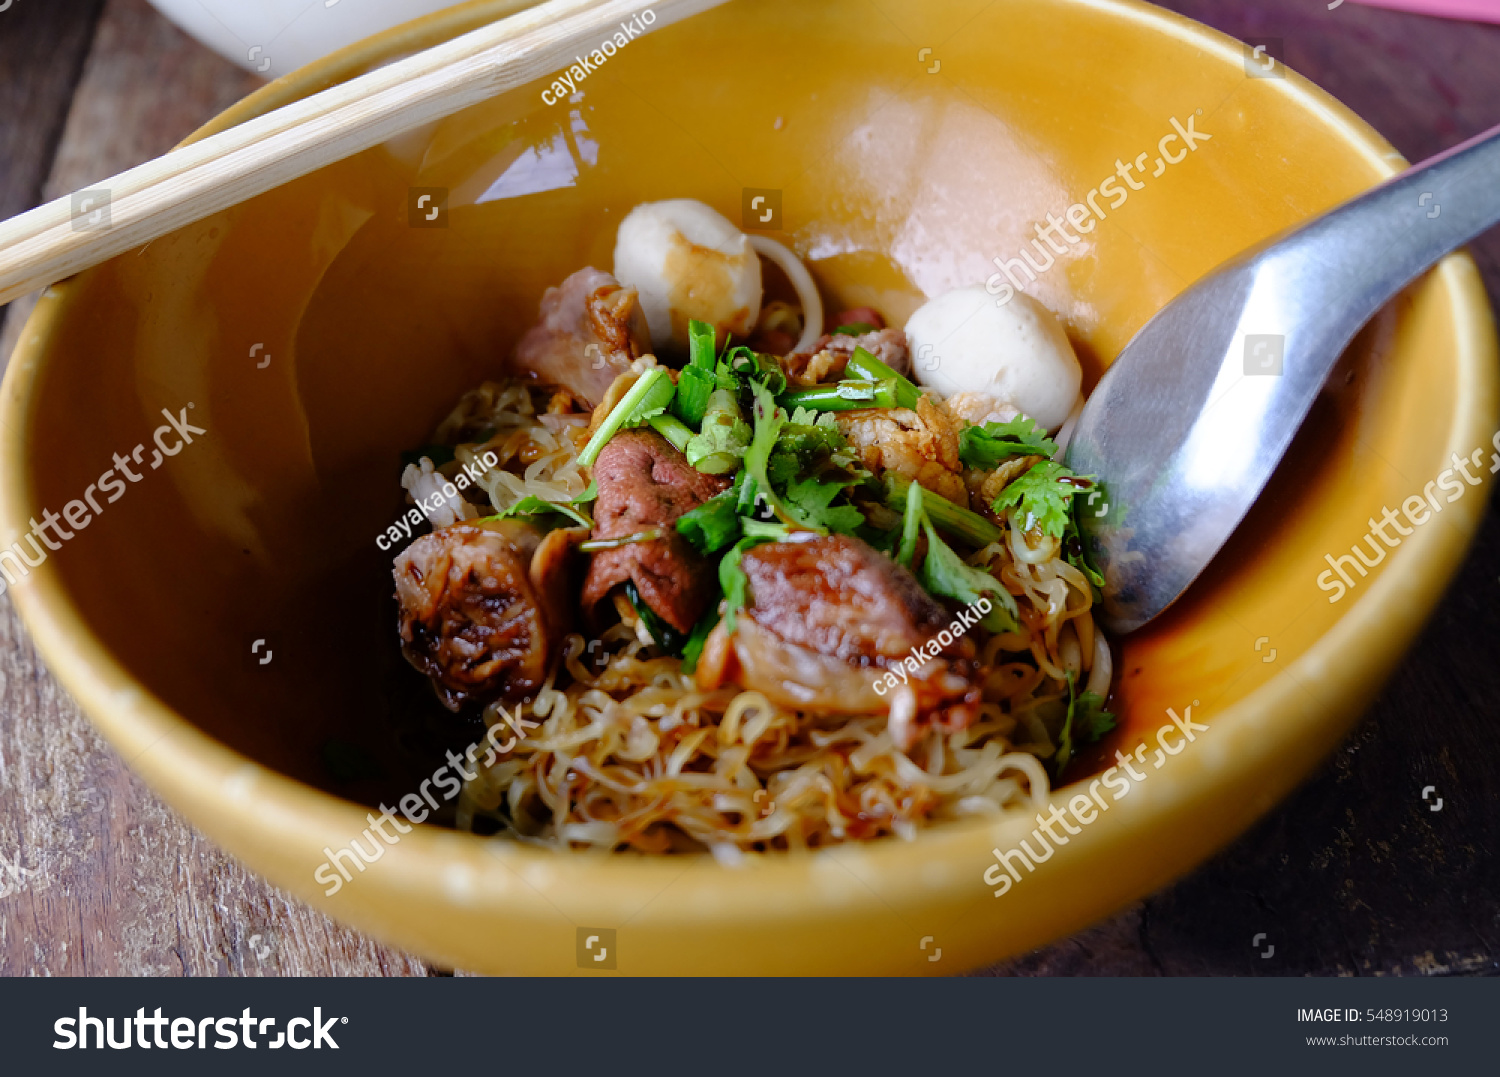 Download Thai Noodle Yellow Bowl On Wood Food And Drink Stock Image 548919013 PSD Mockup Templates